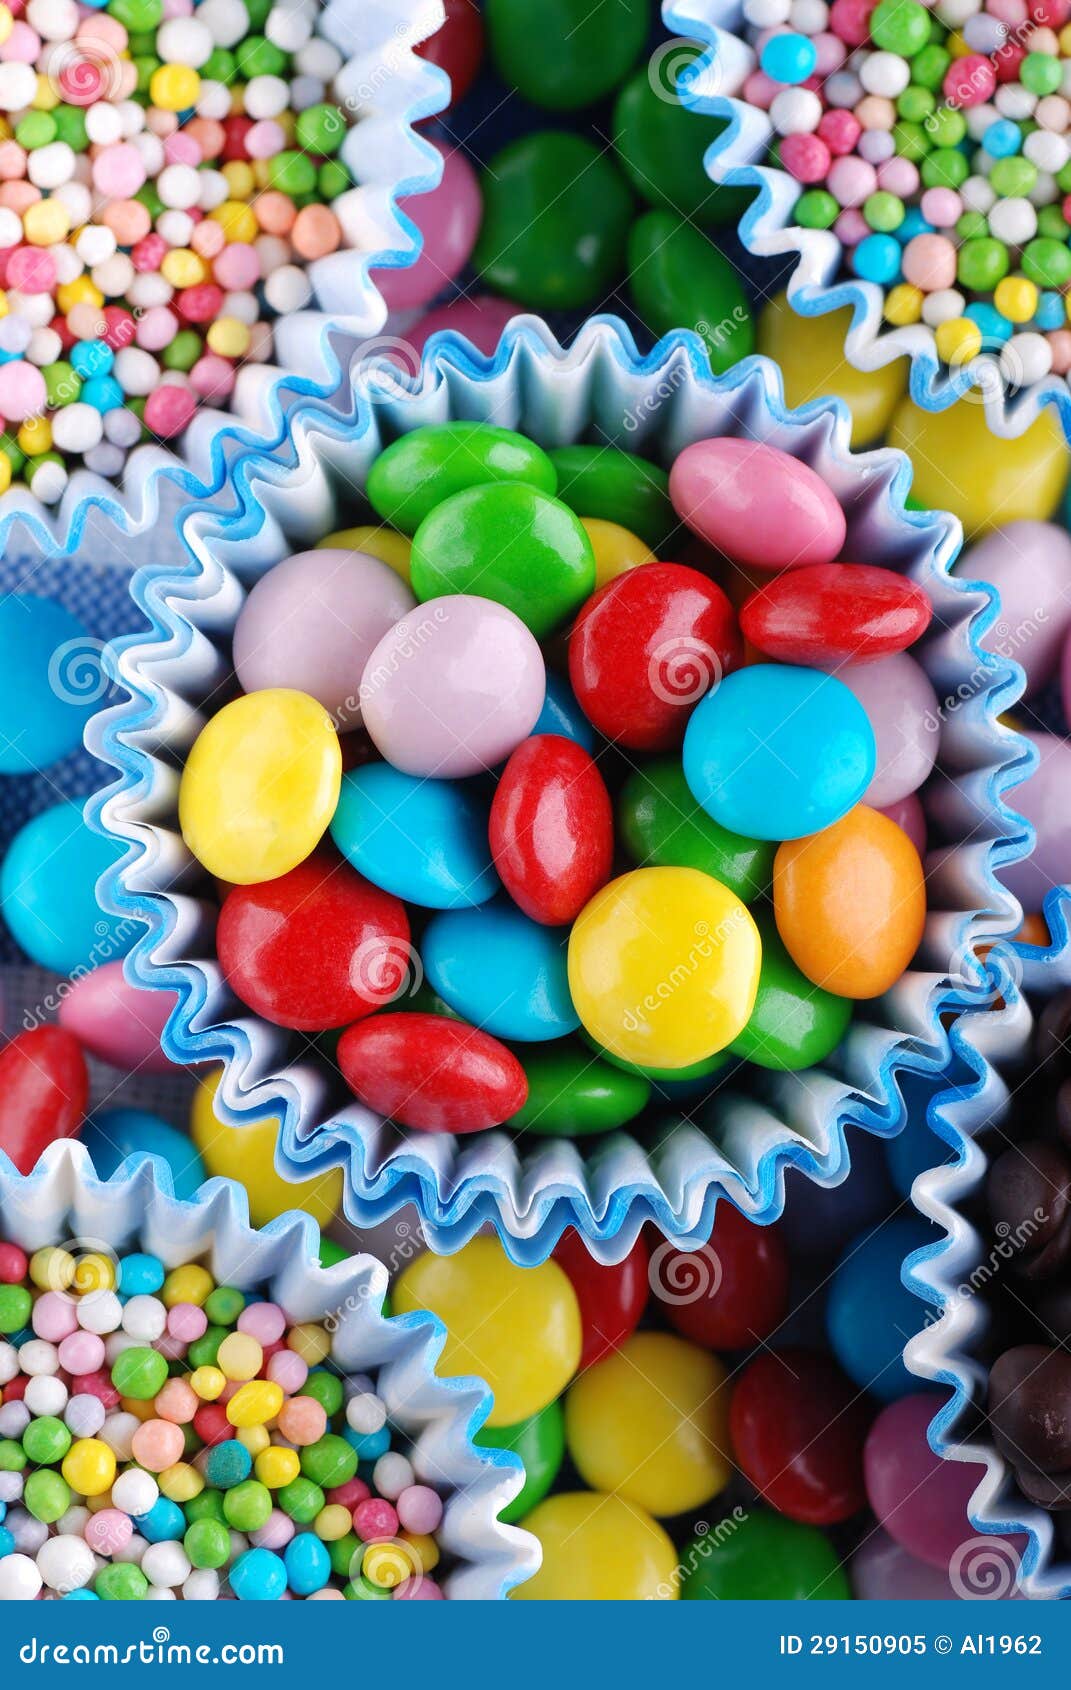 Colored smarties stock image. Image of green, heap, confectionery ...